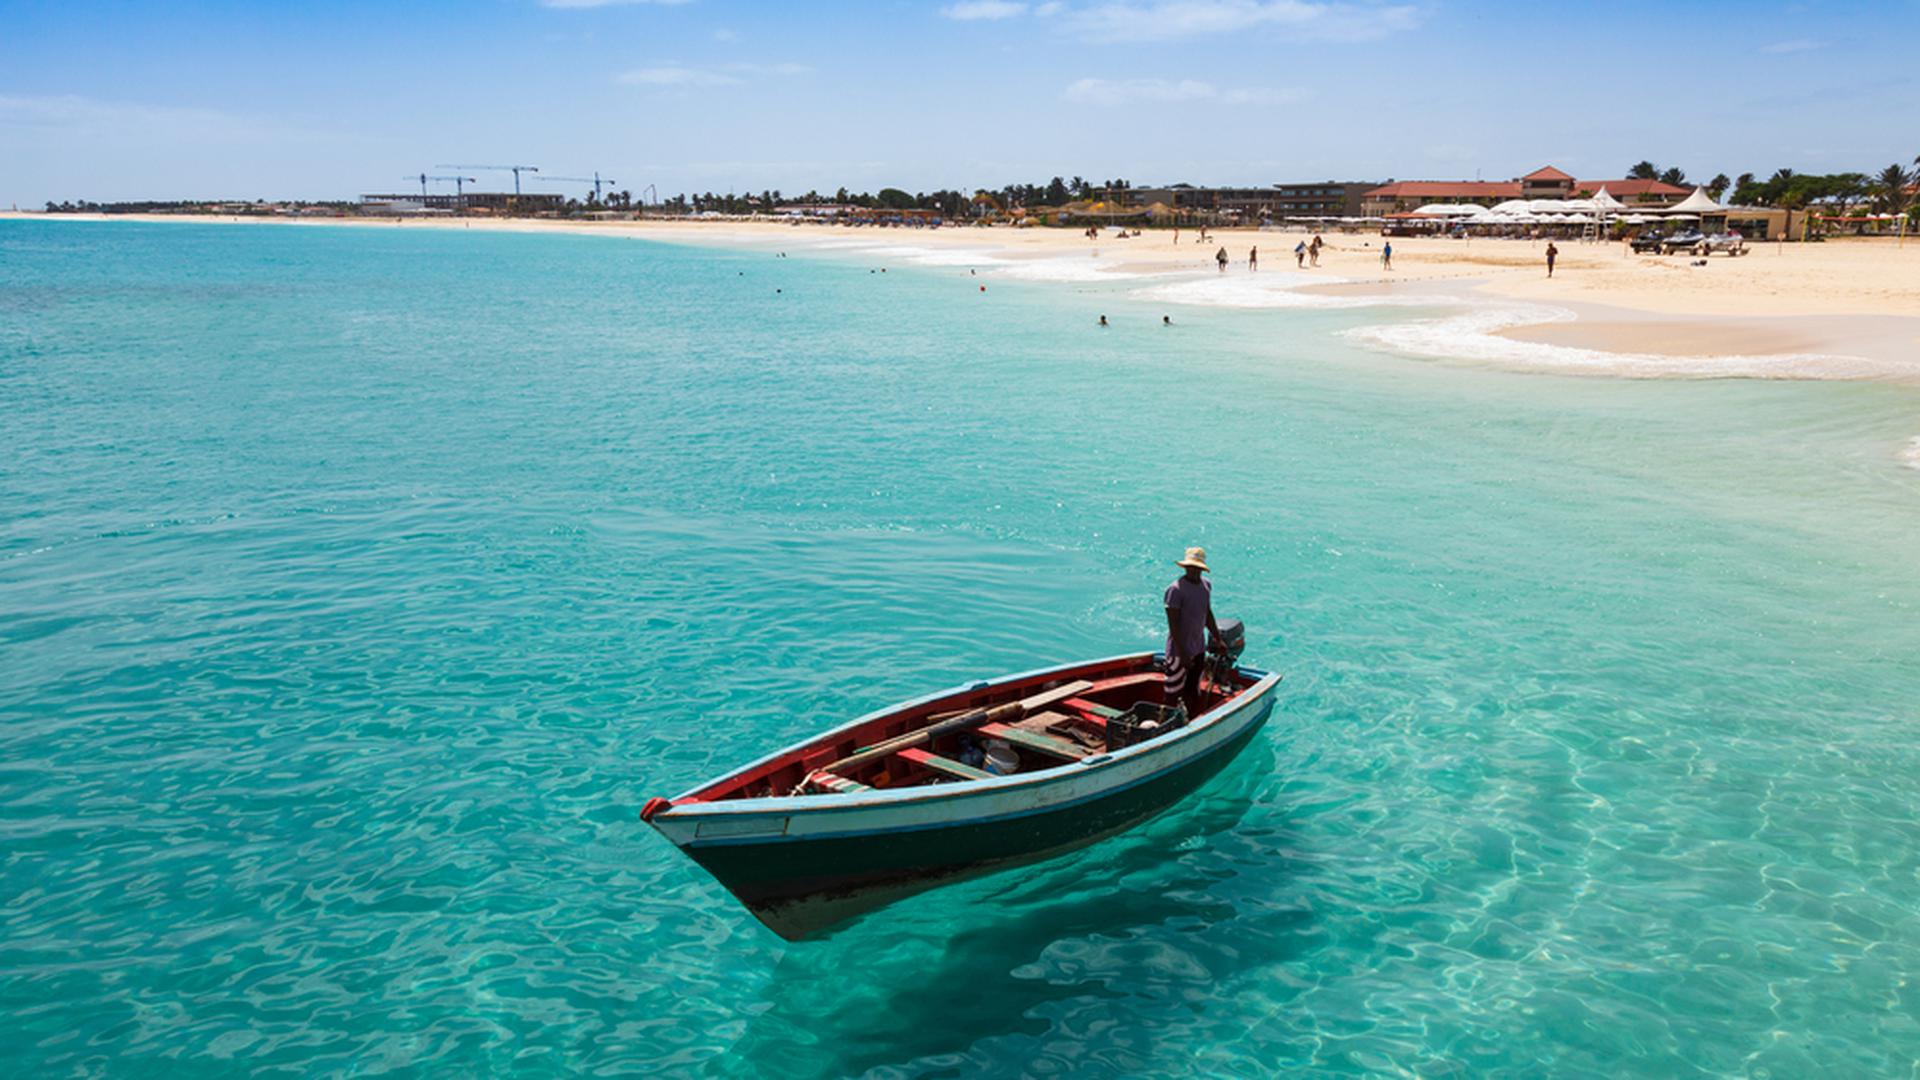 Flights to Cape Verde leave Findel every Tuesday, Thursday and Friday throughout winter 